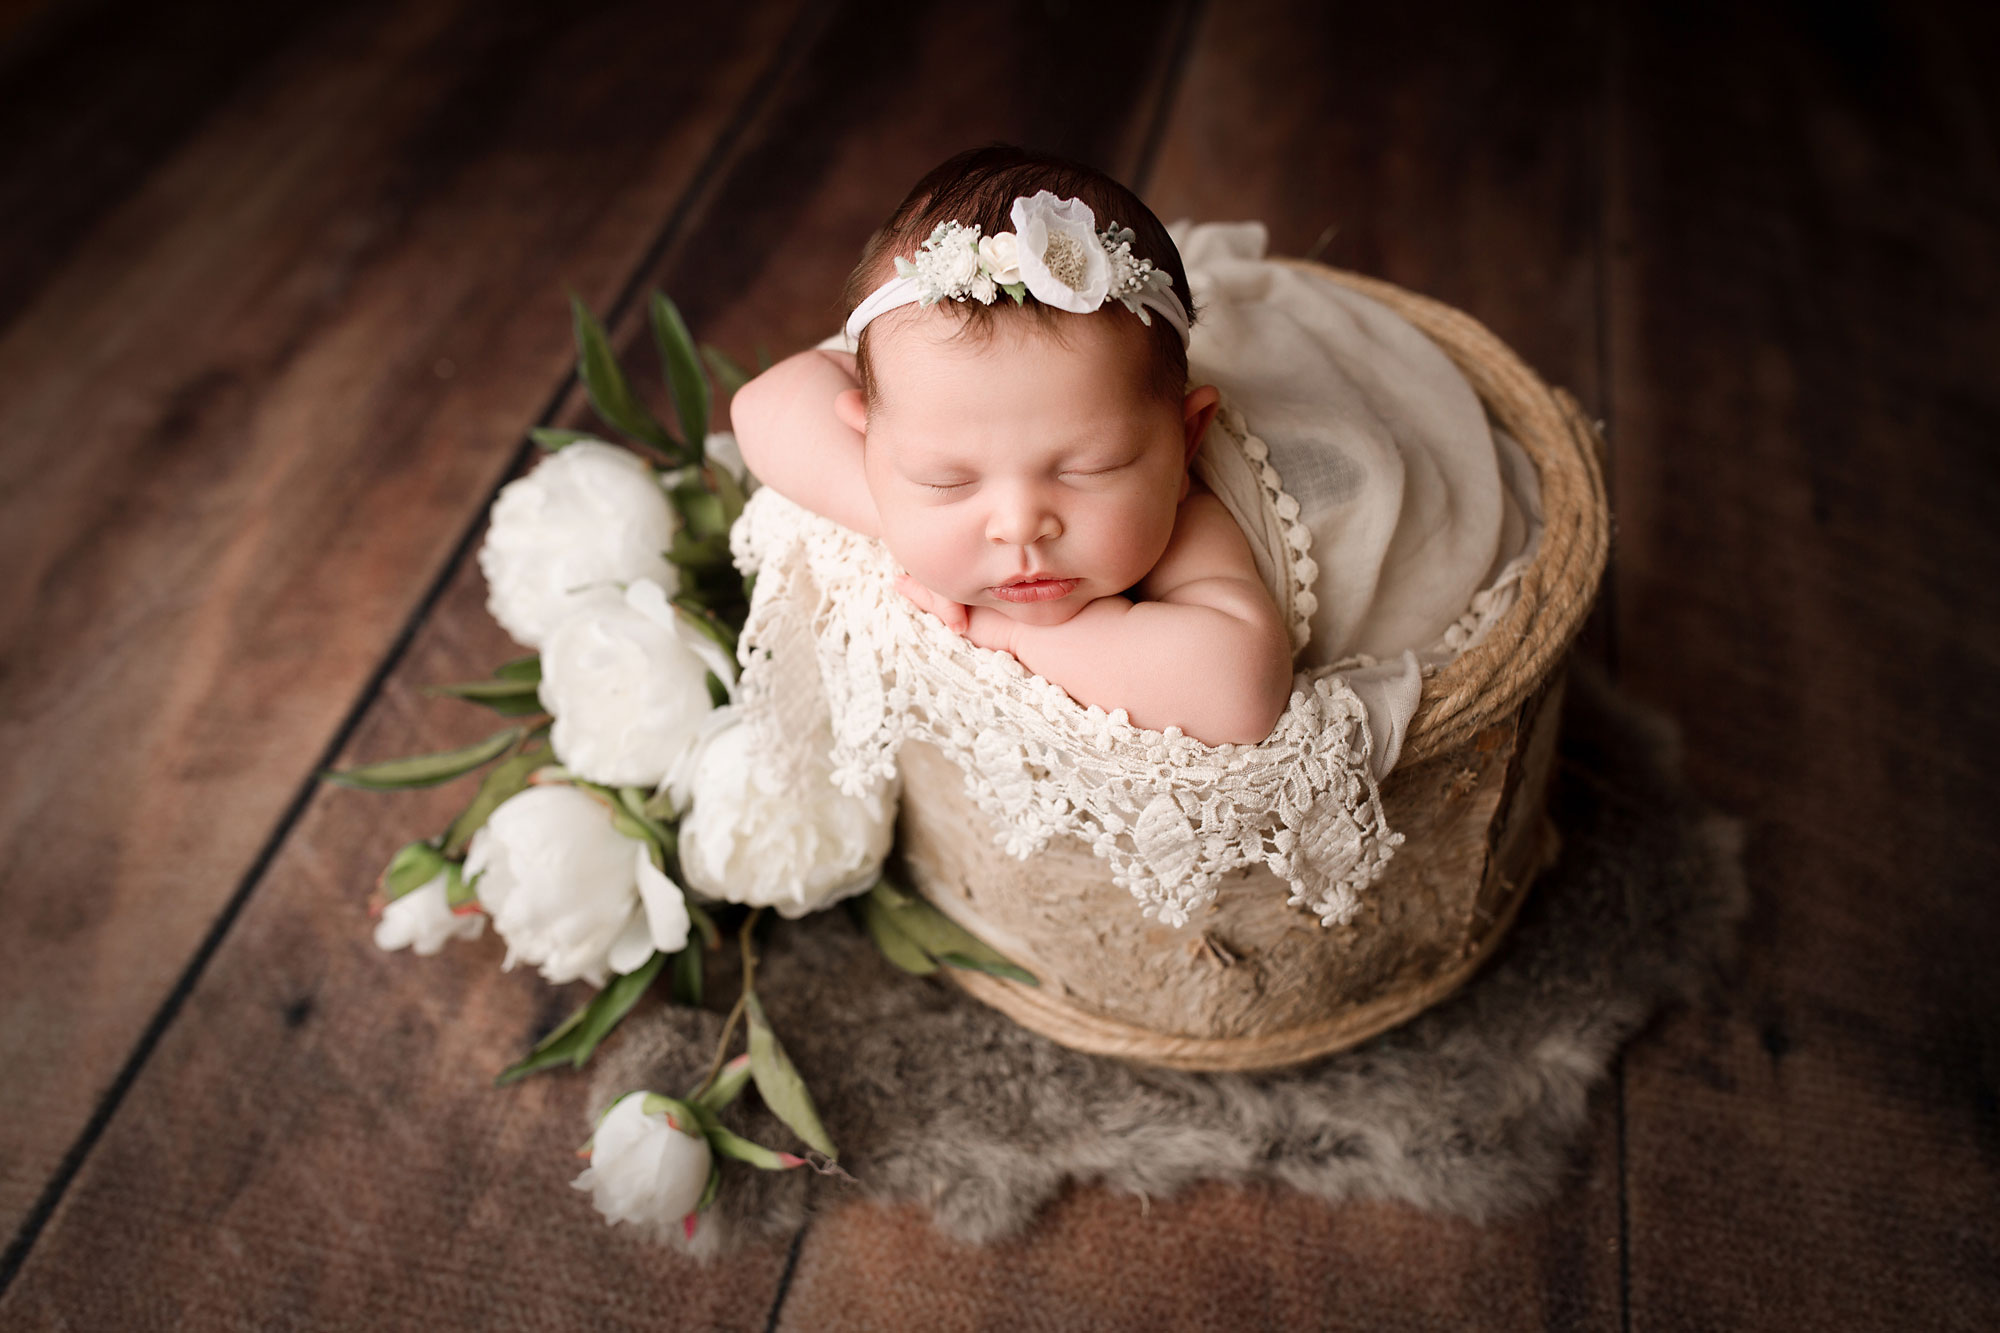 union county nj newborn photographer, baby girl asleep in rustic setup with lace blanket and white flowers